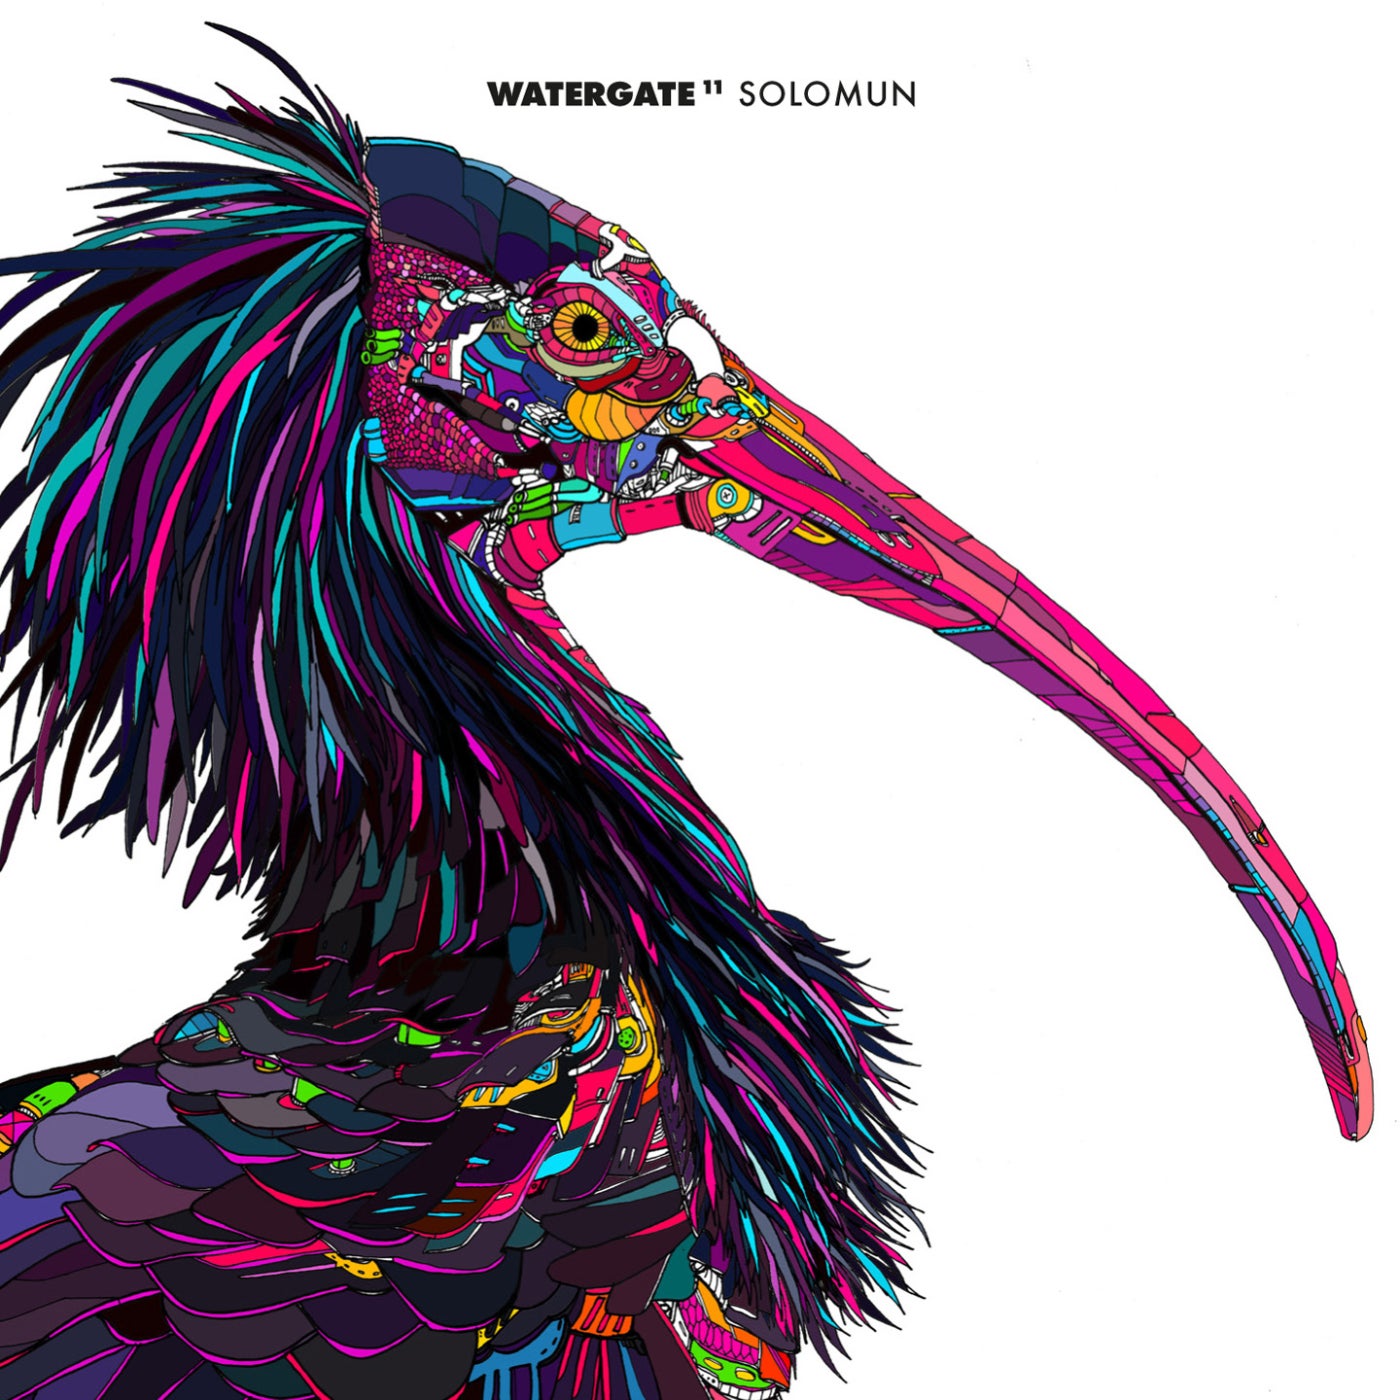 Watergate01 (compiled by Onur Özer)